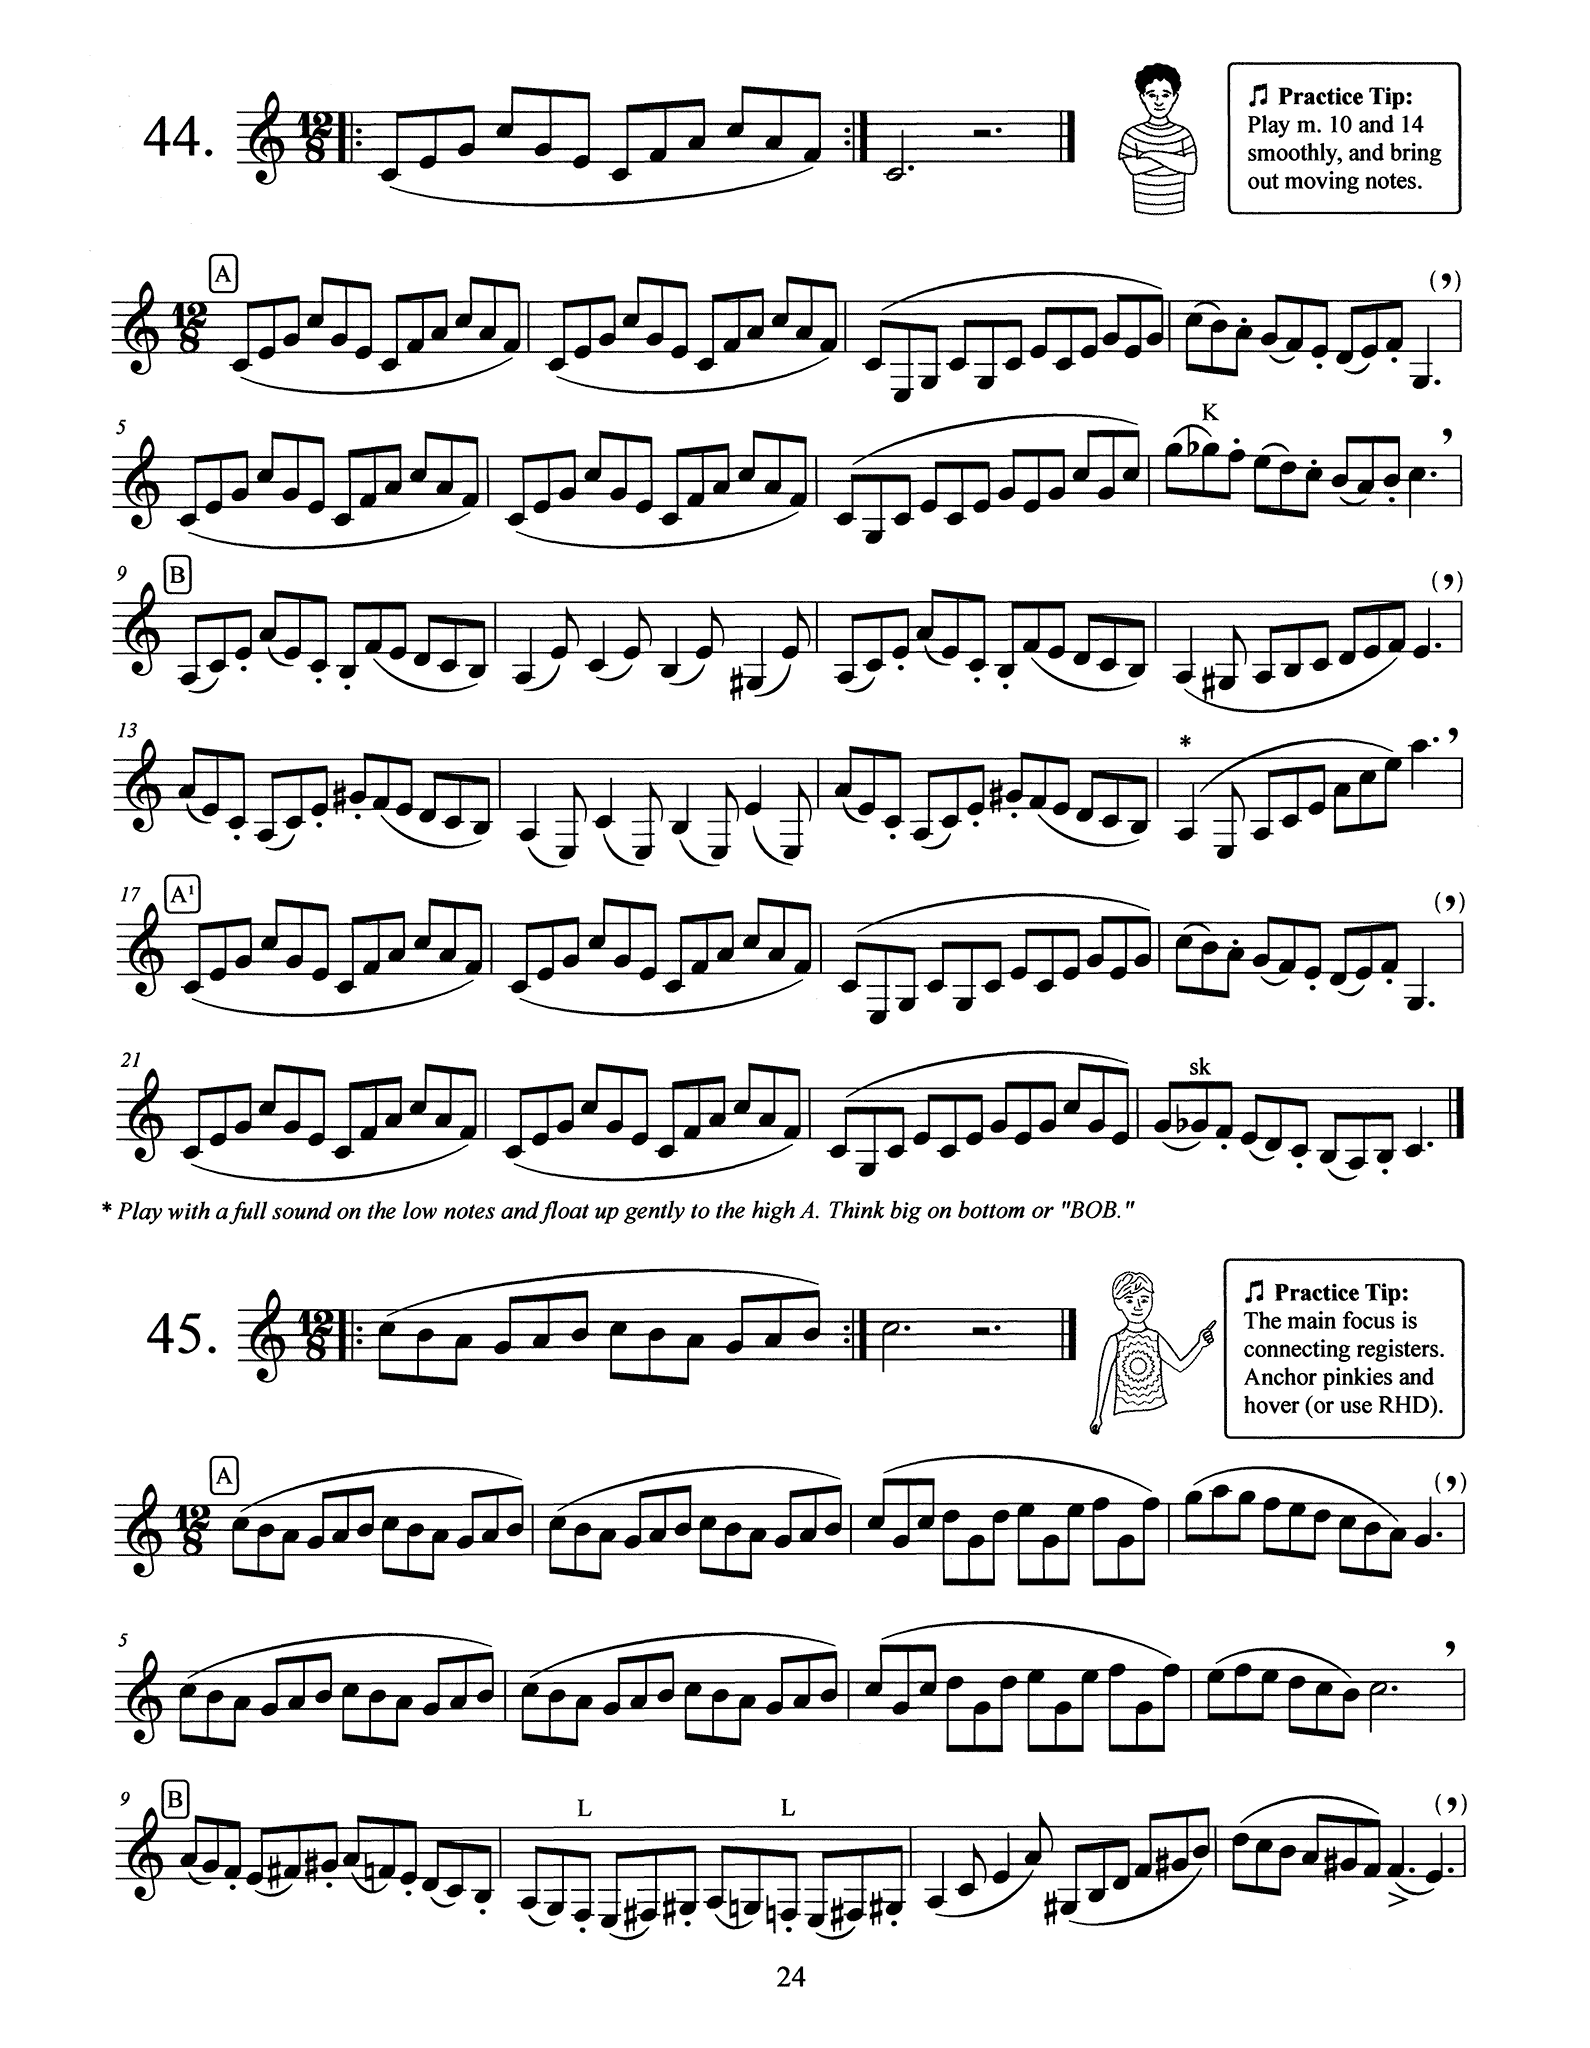 Denny-Chambers Finger Fitness Foundations clarinet etudes page 24